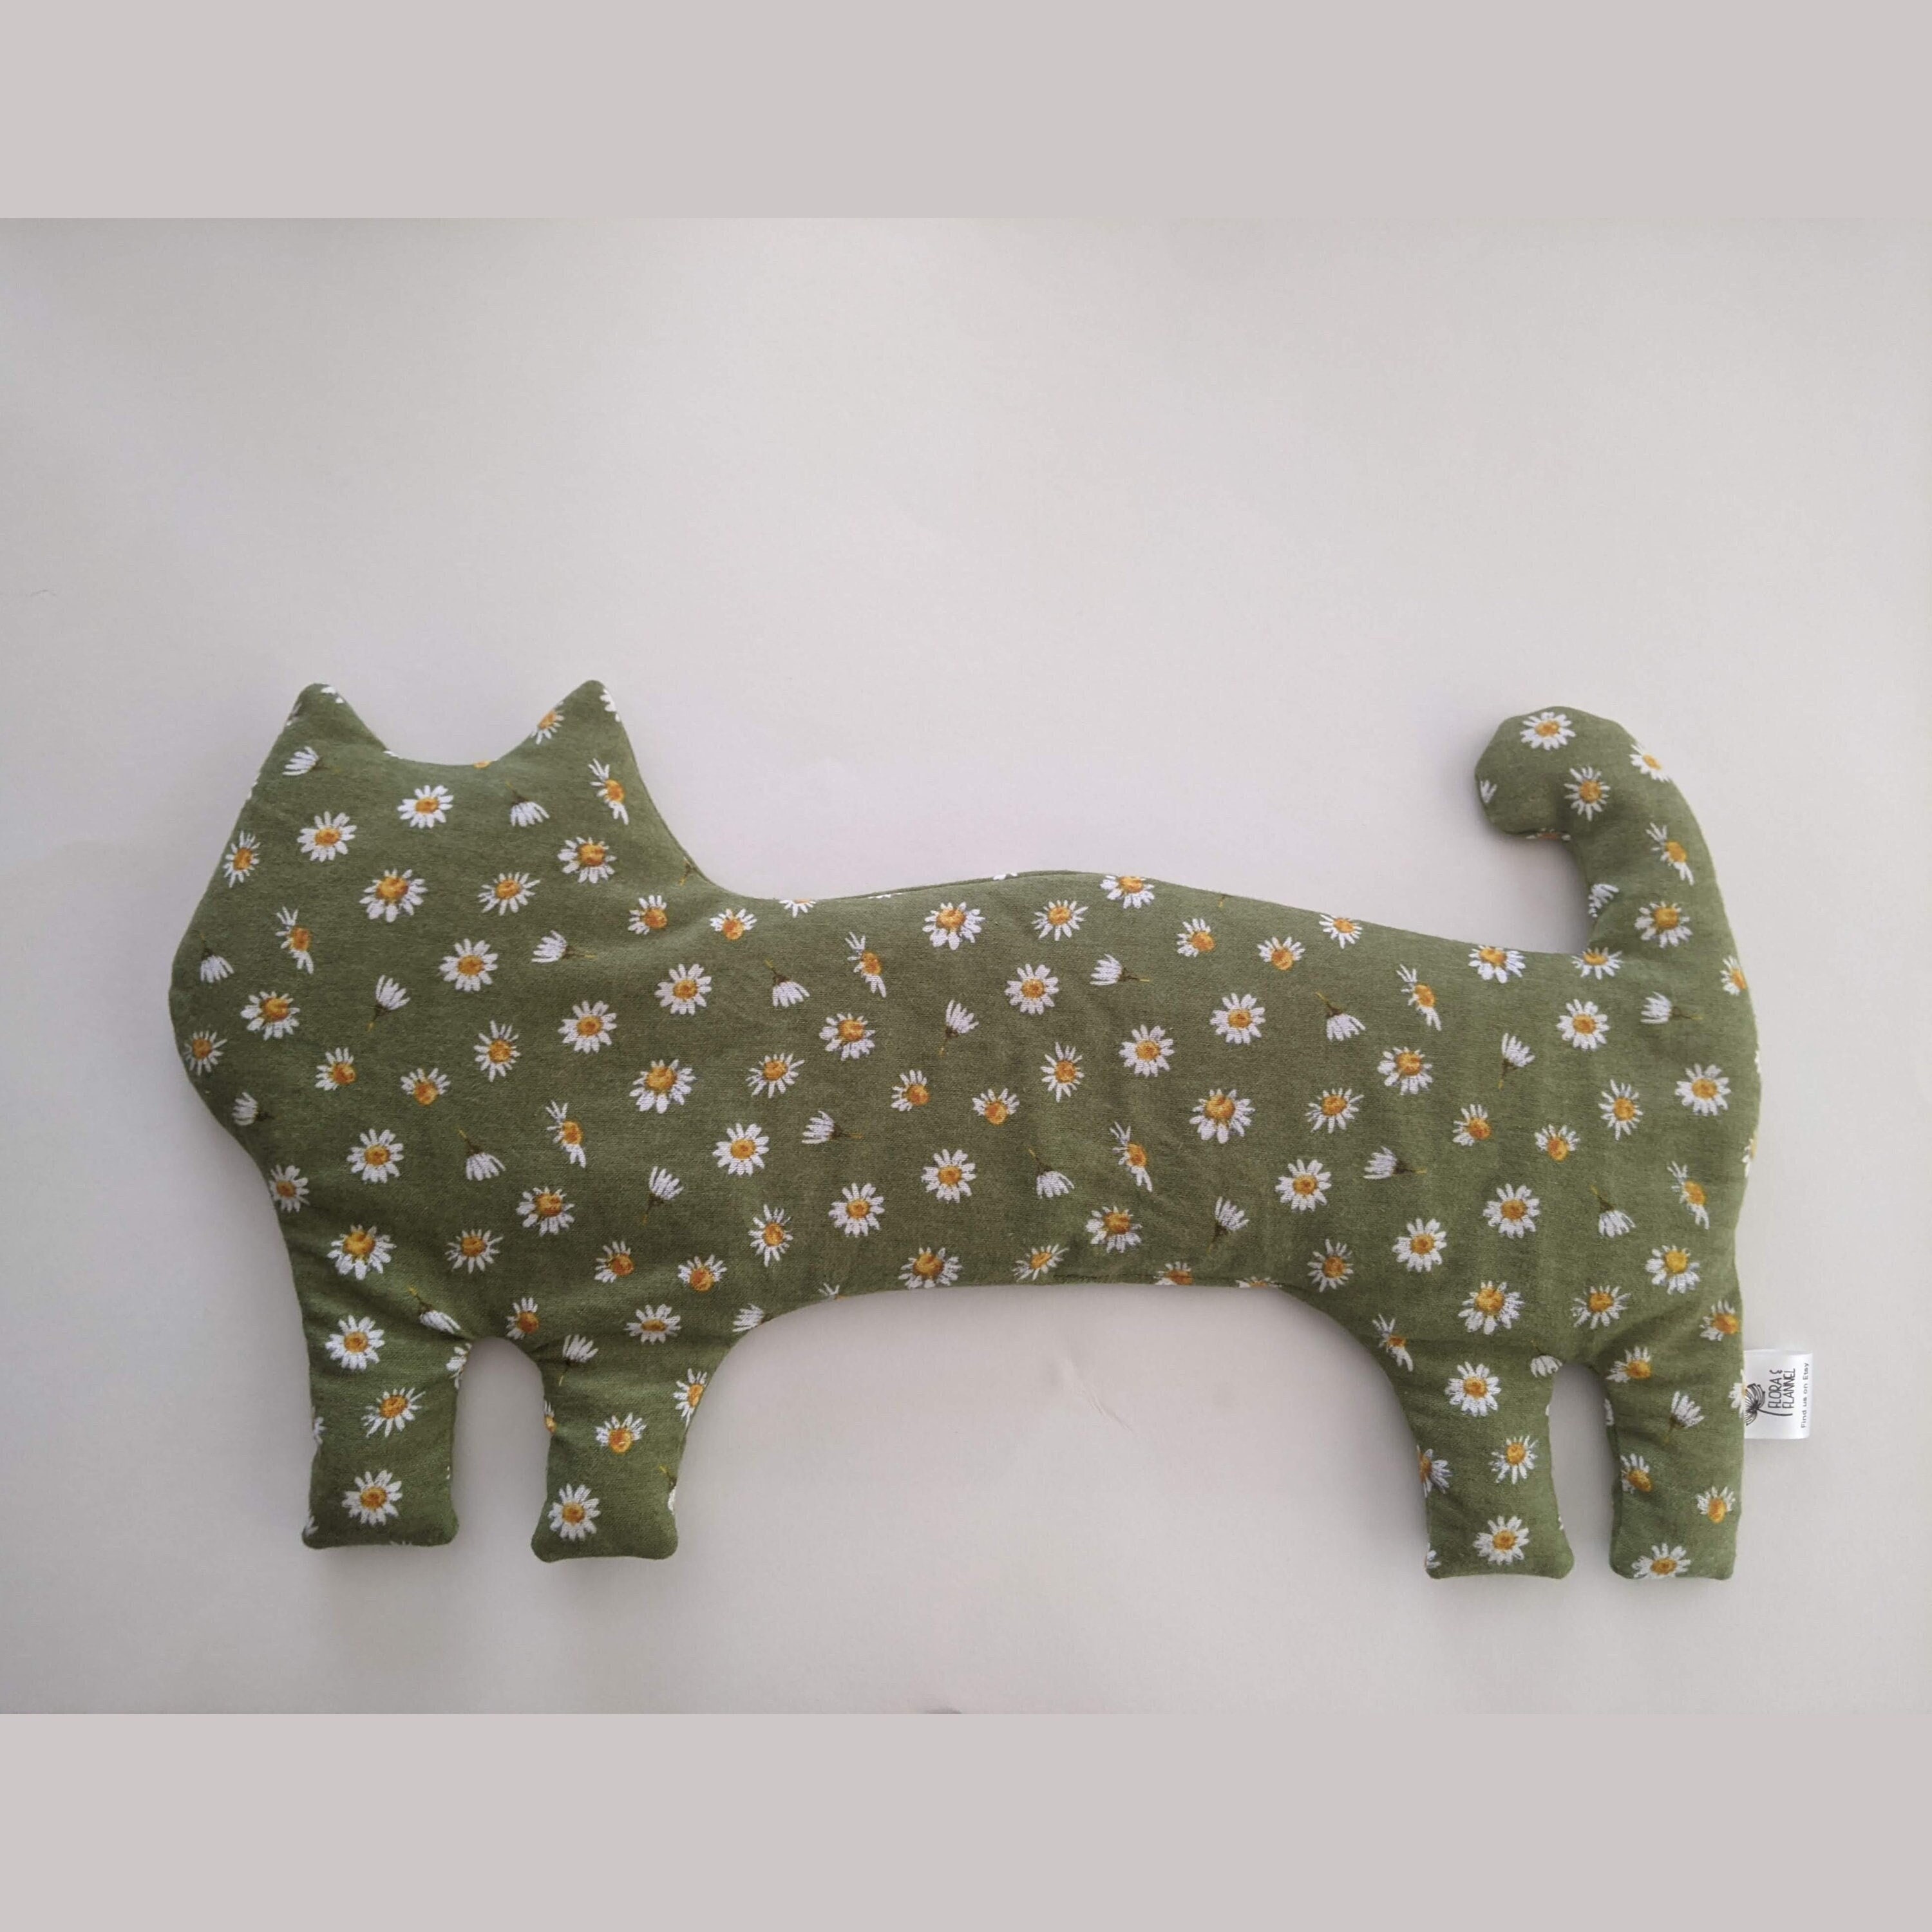 Sage Daisy Cat Heating Pad, Neck Wrap, Aromatherapy, Buckwheat or Rice, Microwave or Cooling Pad, Cat Lover Gift